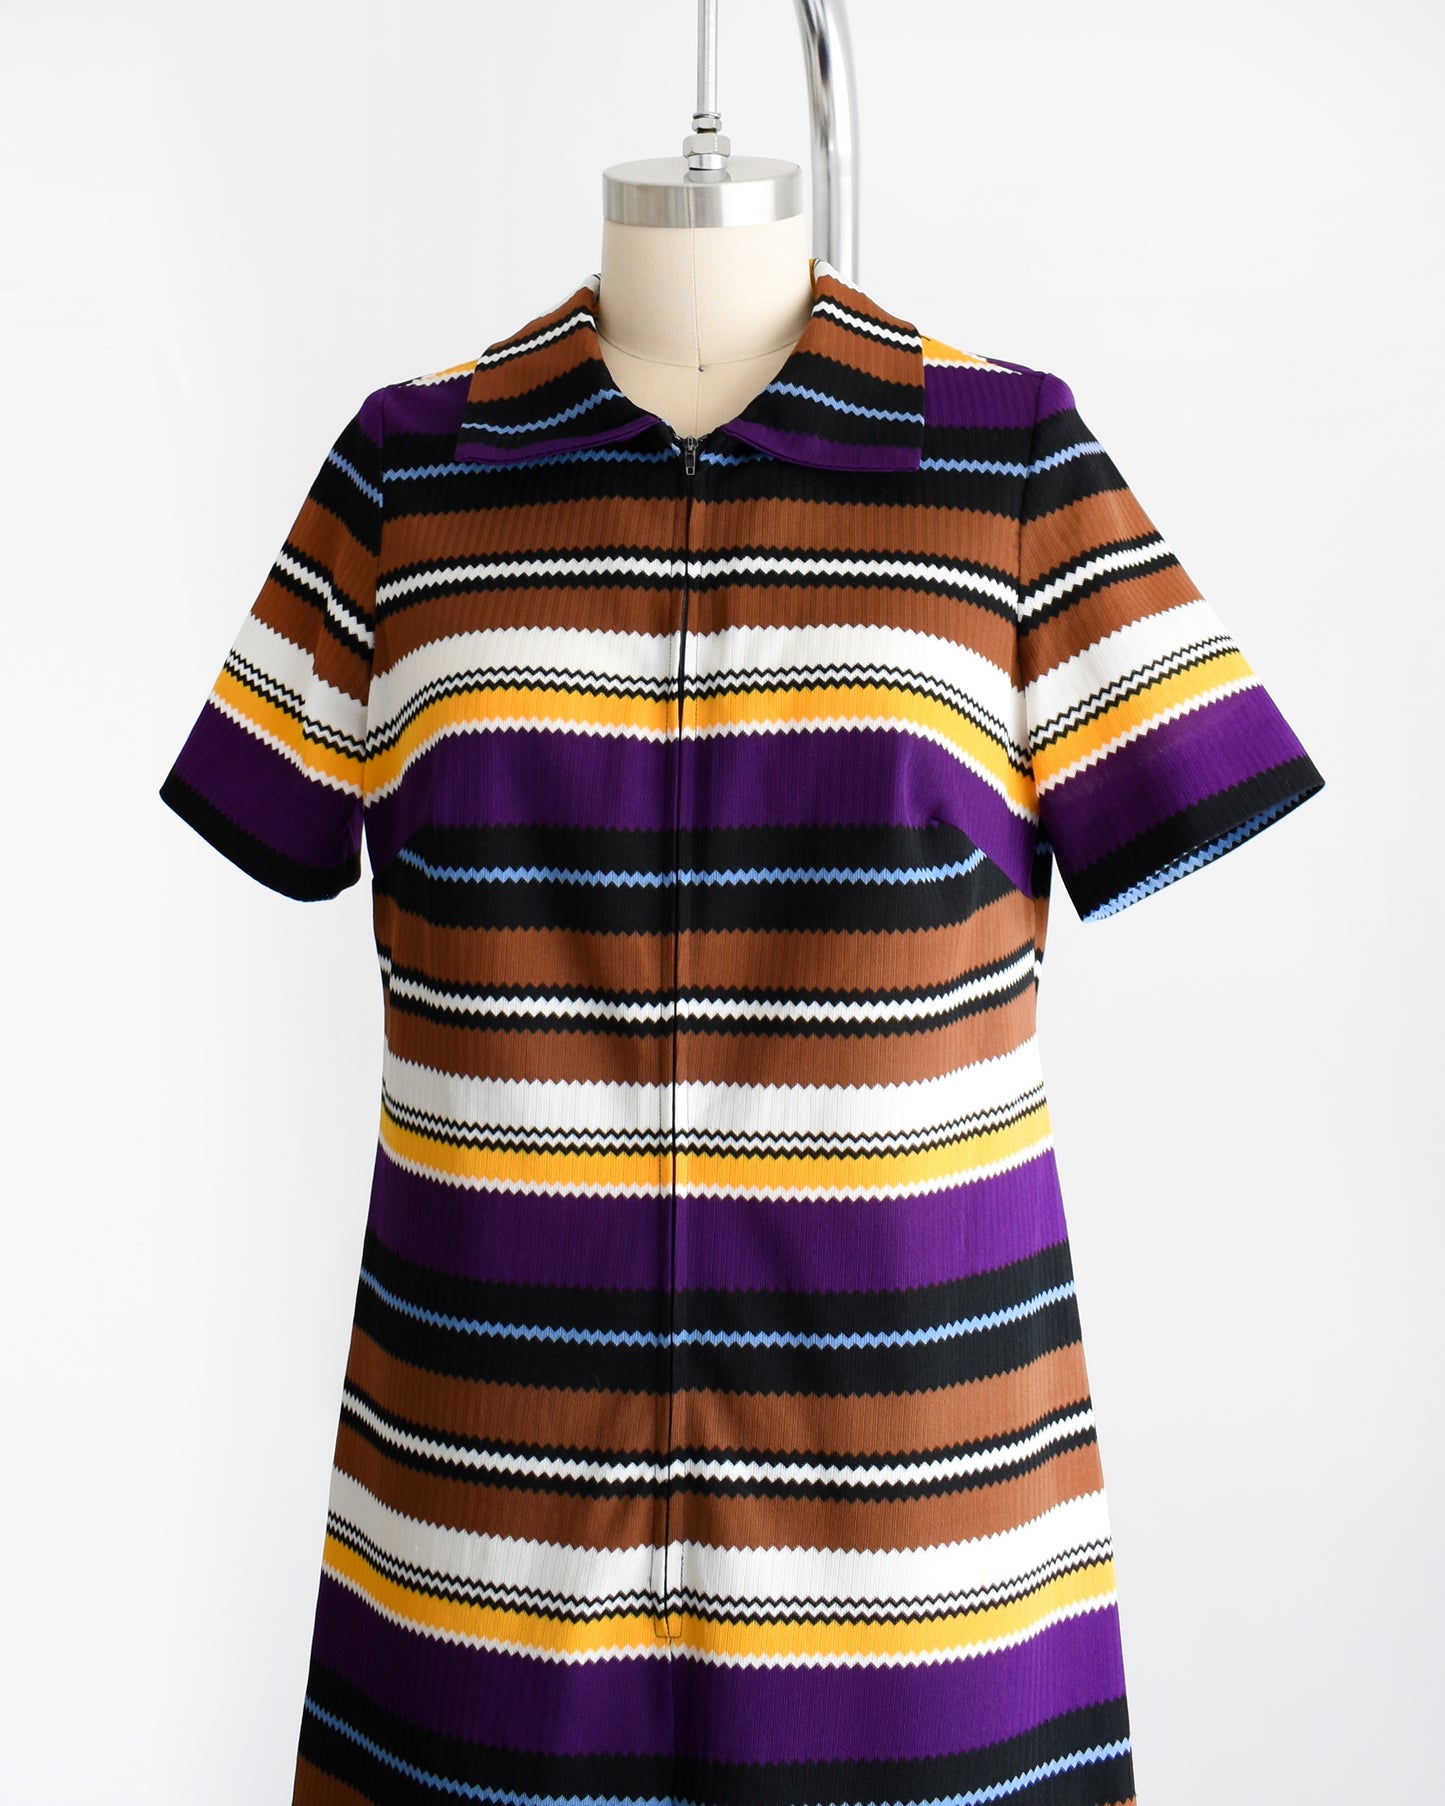 Side front view of a vintage 1970s striped mod dress that has black, brown, white, blue, yellow, and purple horizontal stripes with zigzag edges. The dress features a zipper down the front which is zipped in this photo.